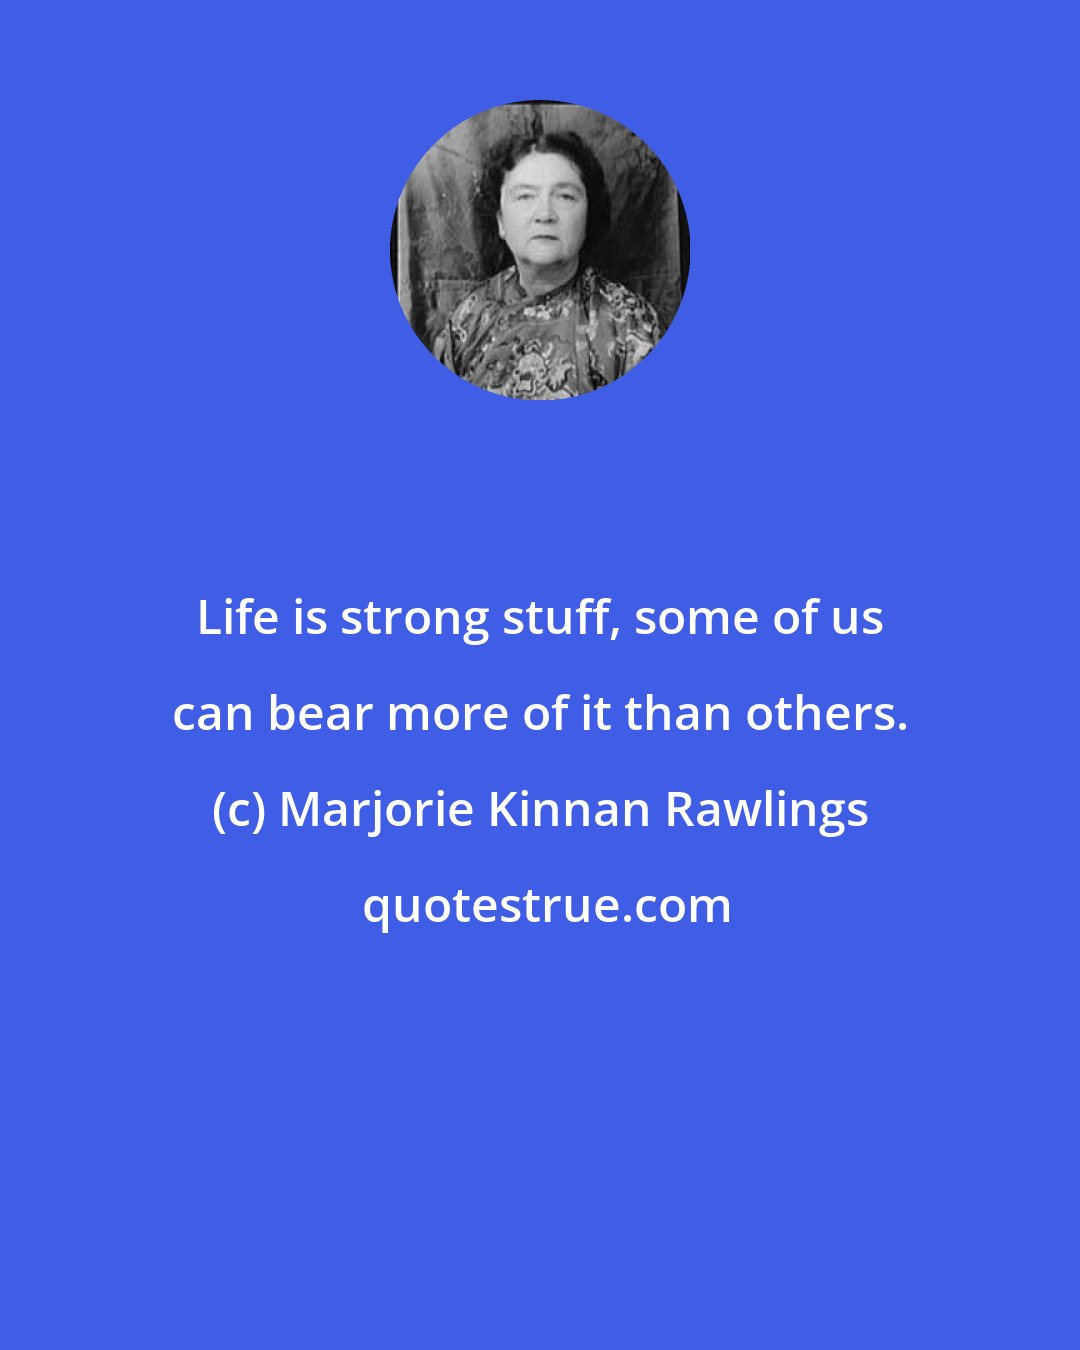 Marjorie Kinnan Rawlings: Life is strong stuff, some of us can bear more of it than others.